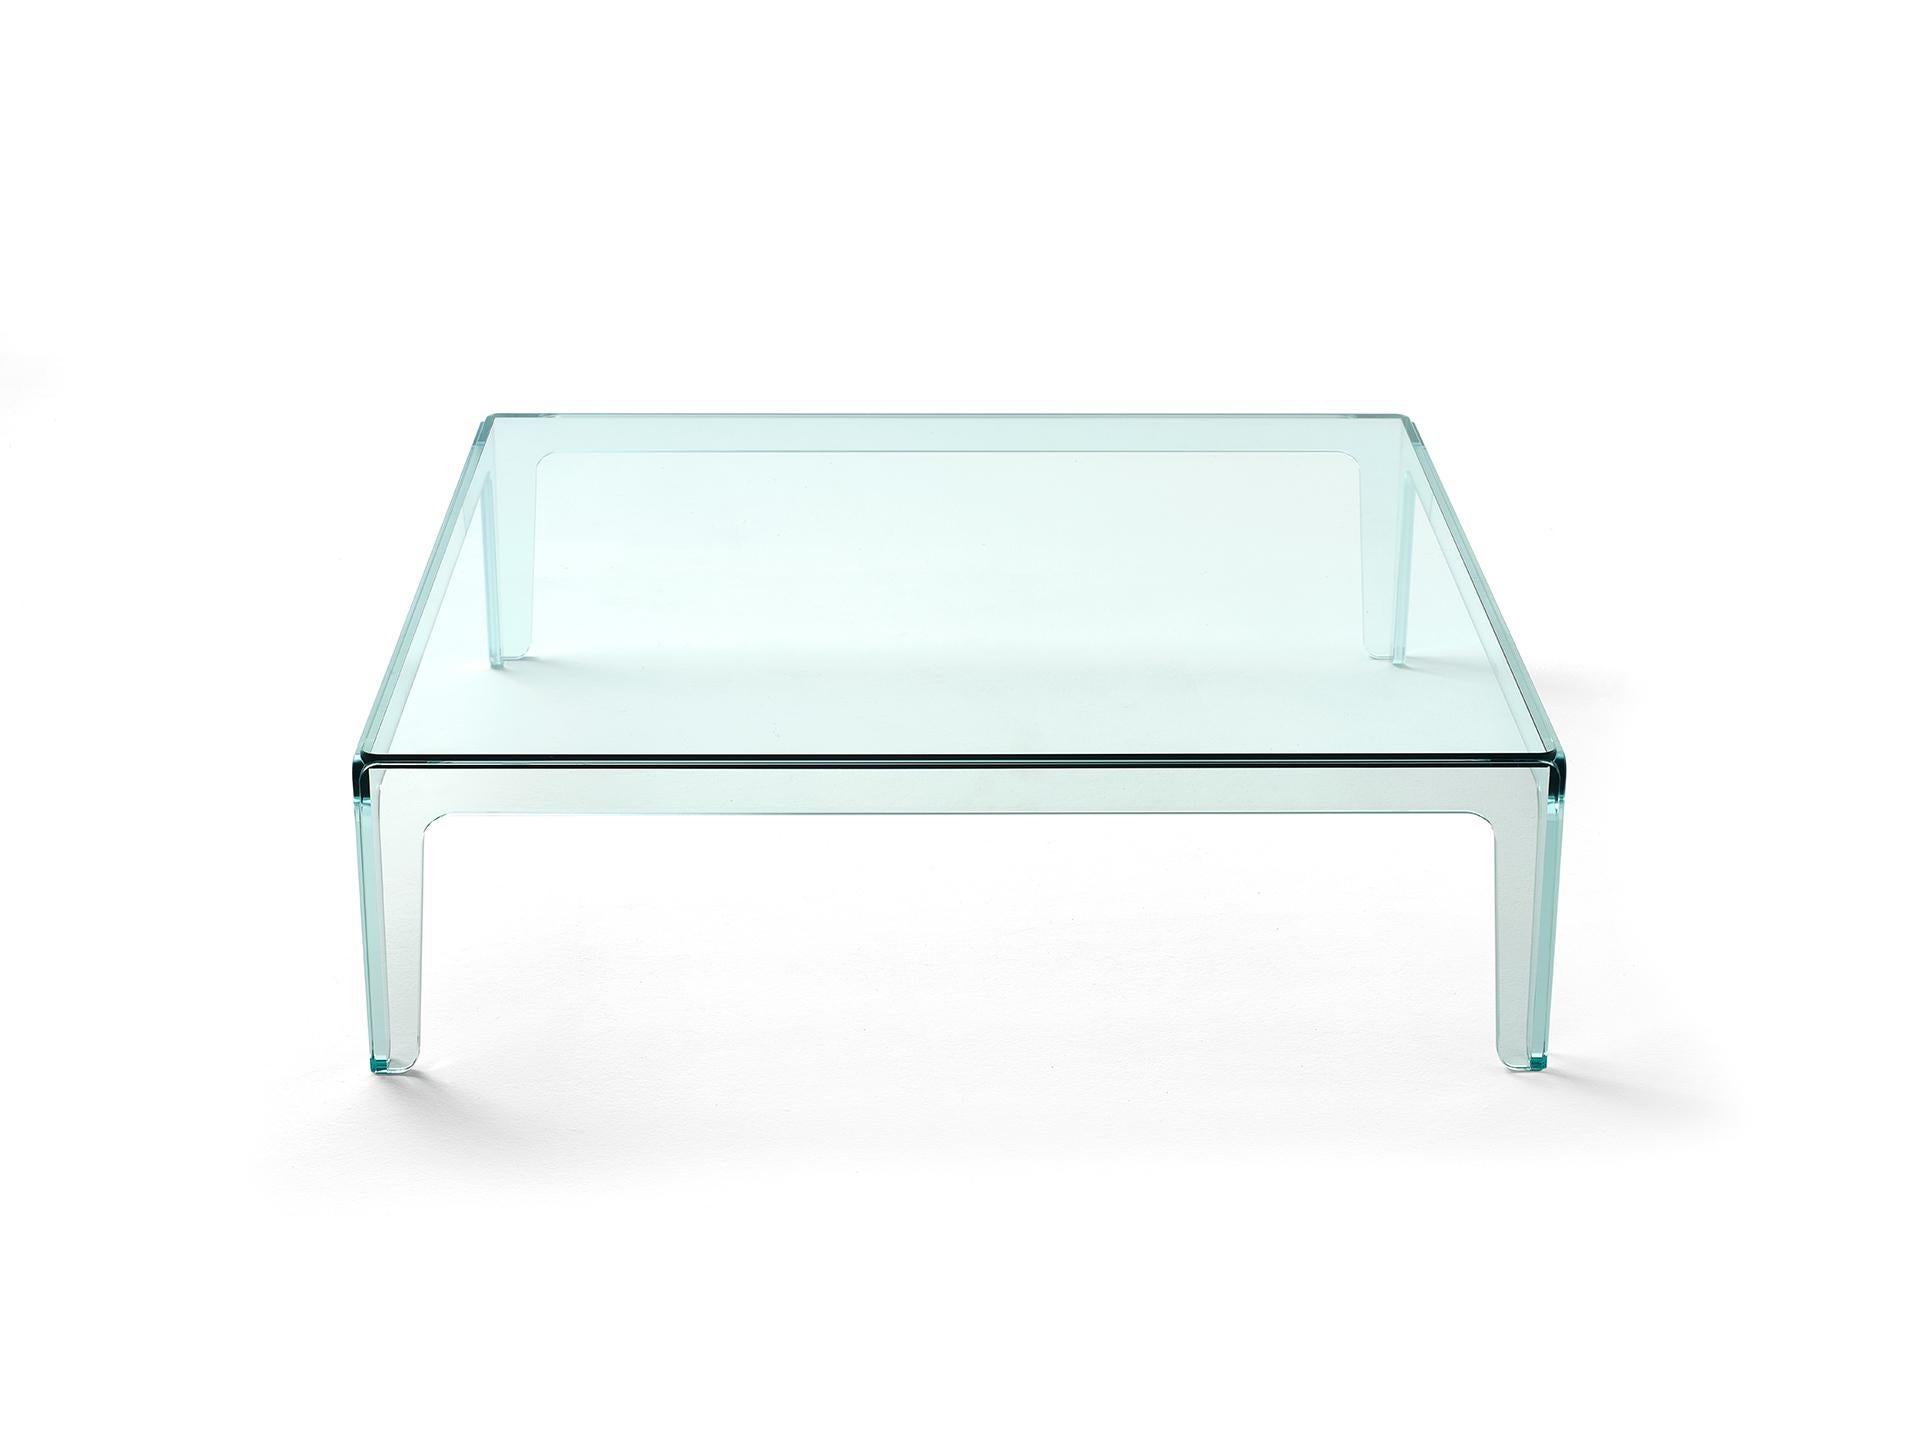 A 4-legged low table completely made of glass, Ghost is the transparent version of our best-selling rock low table and it shares the same original sculptural detail. But while the marble version creates the illusion of a table sculpted out of a